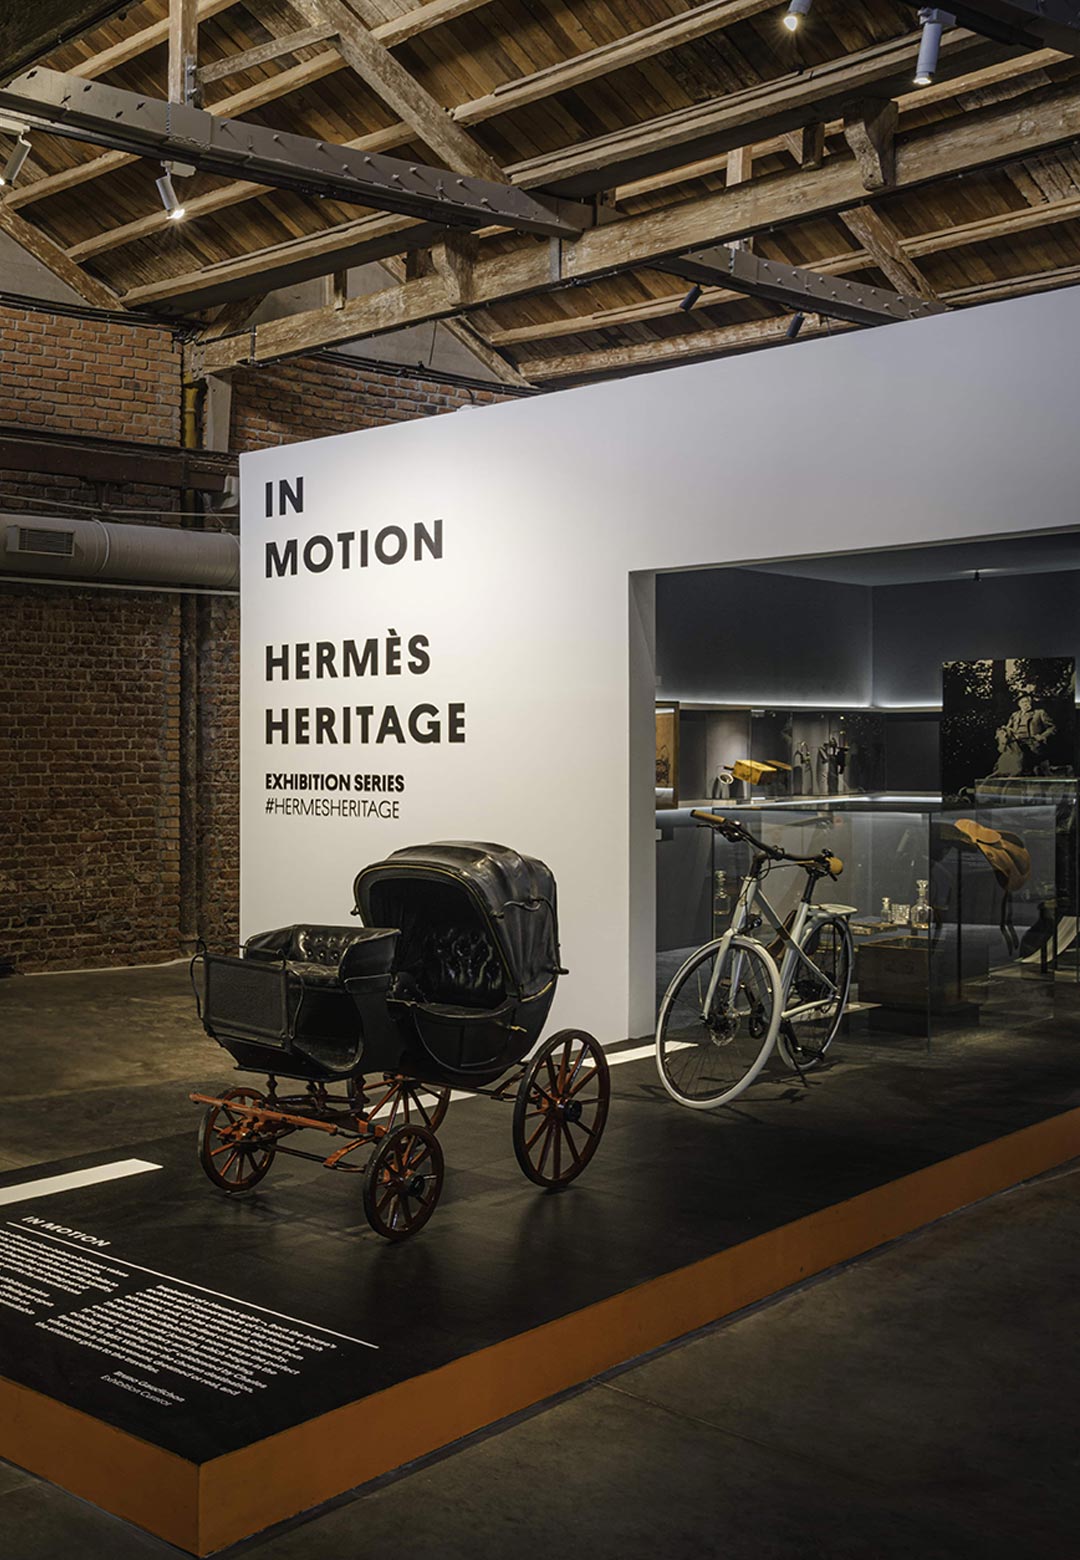 Harnessing the heritage of 185 years of Hermès In Motion